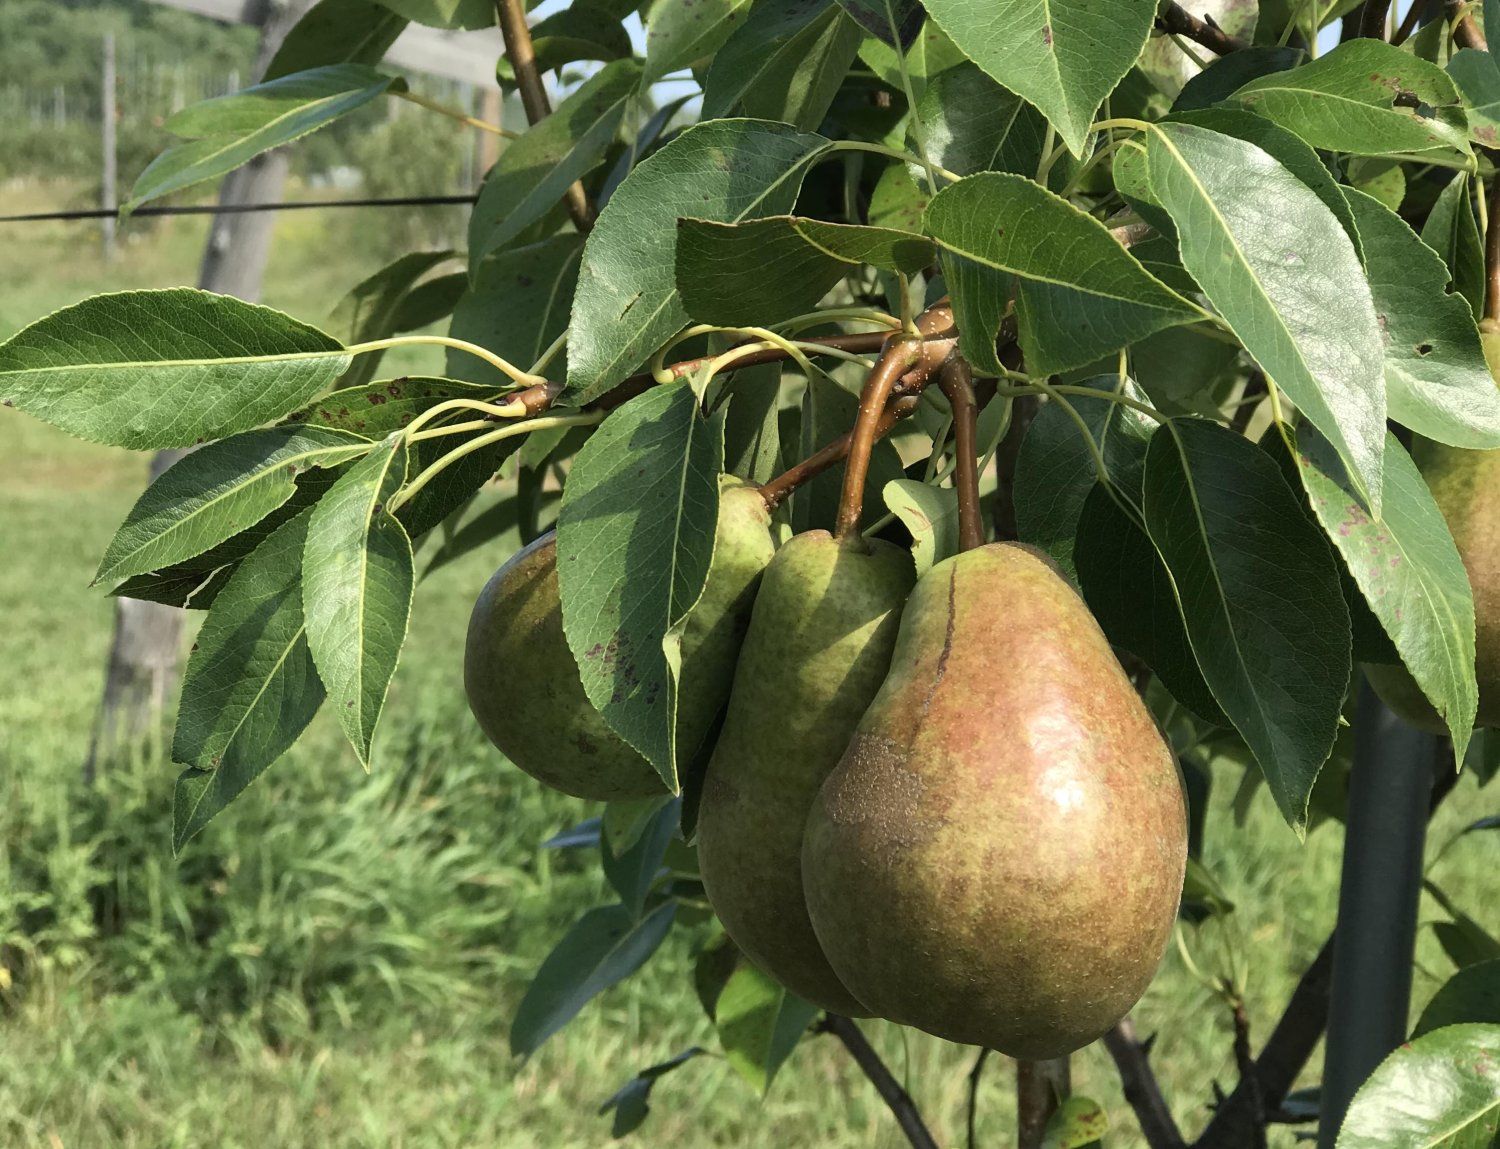 Next Happening: All About Pears at Bayfield Apple Company